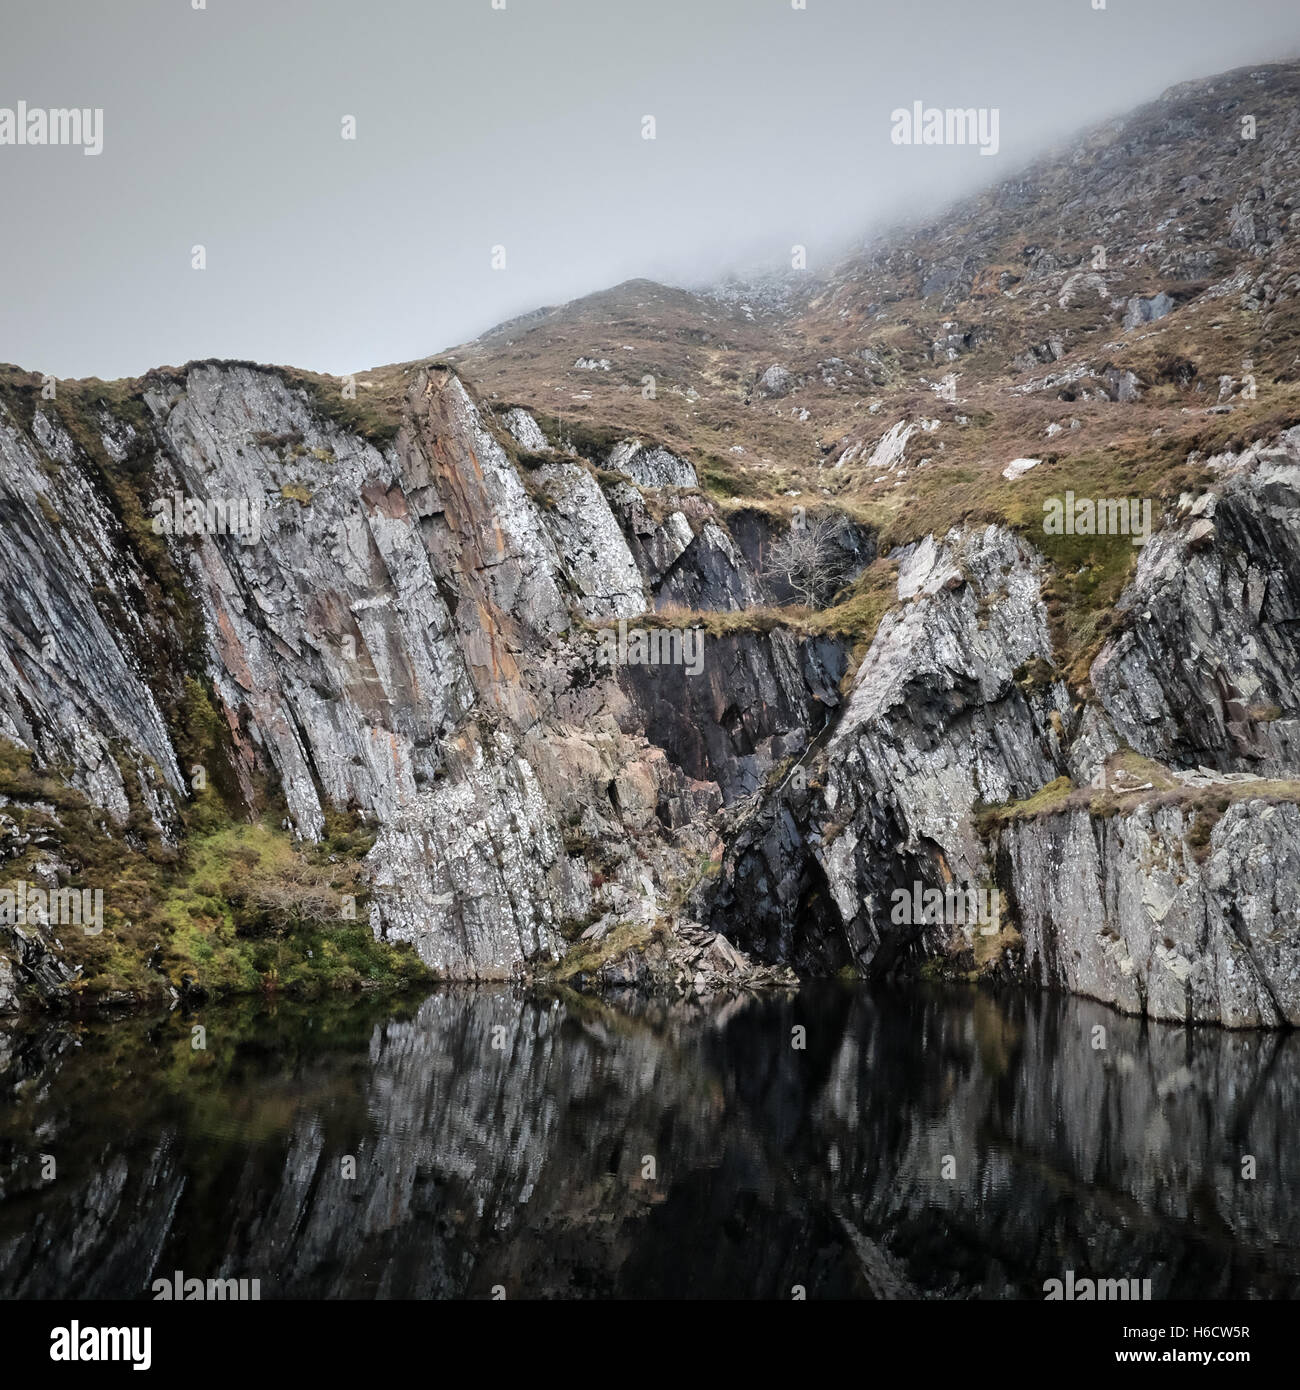 Black water pool in disused slate quarry on the slopes of Carnedd Moel Siabod, Snowdonia, North Wales. U.K. Stock Photo